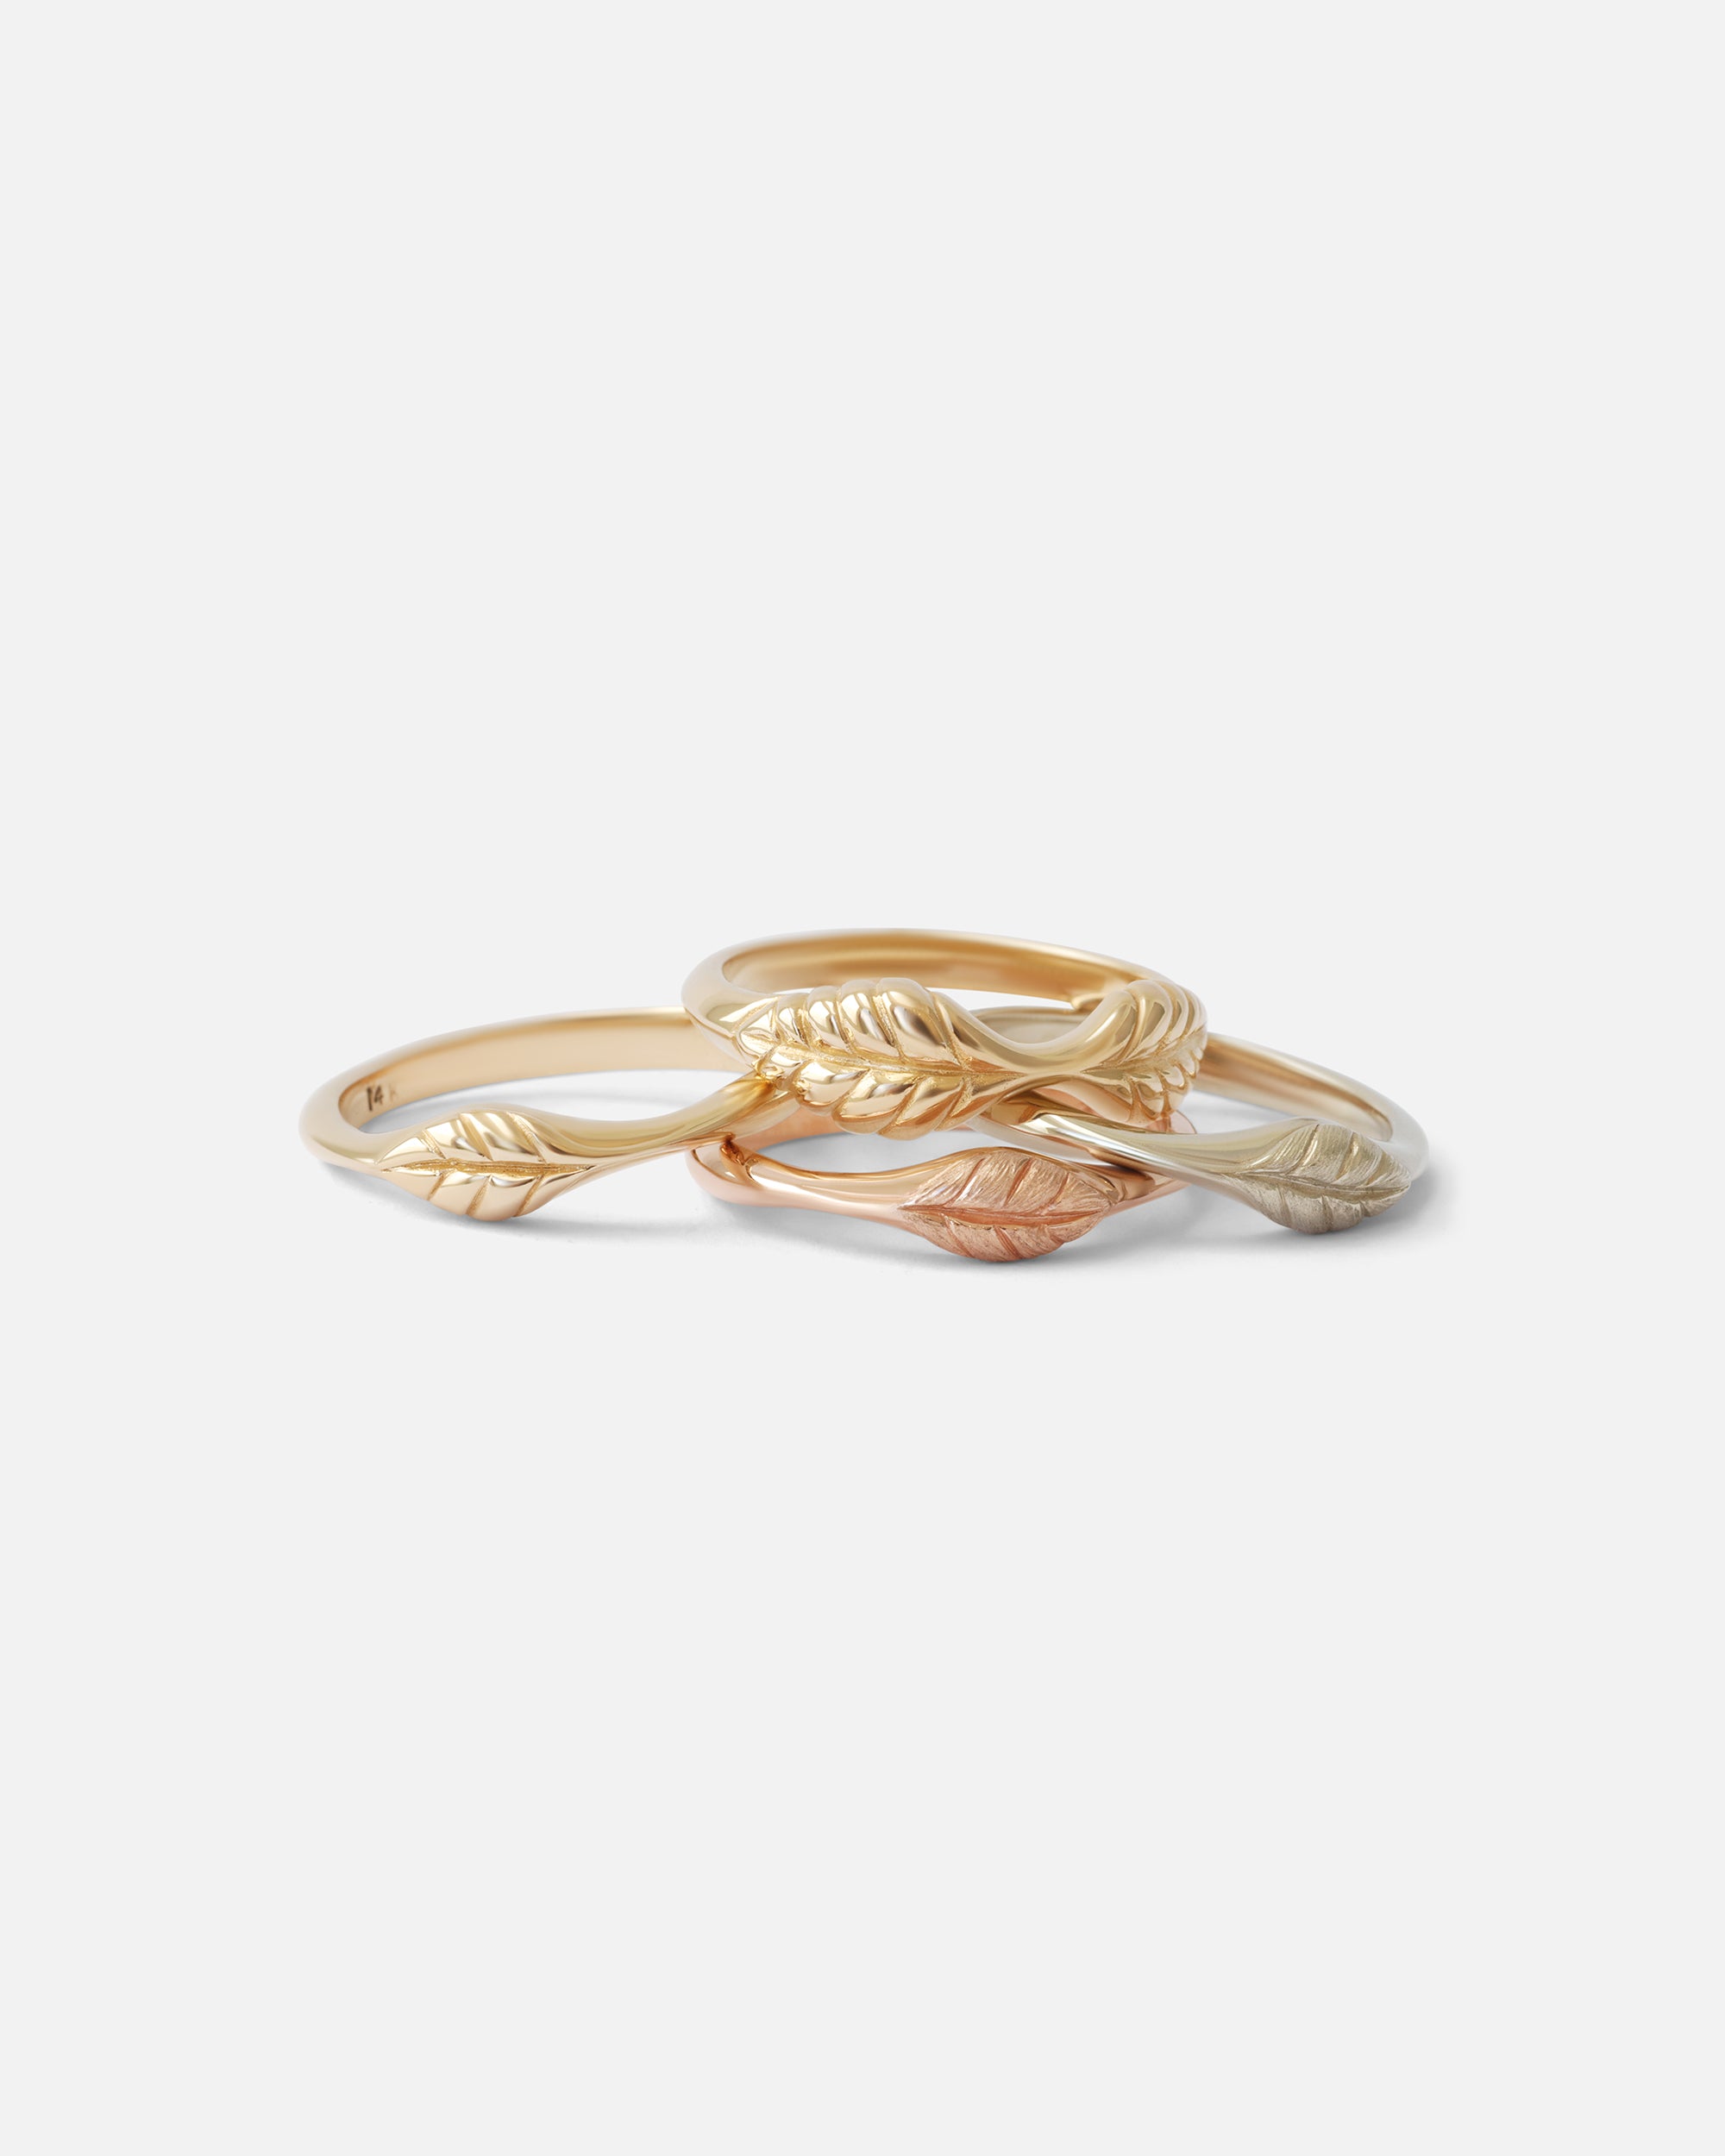 Single Leaf Stacker / Ring By O Channell Designs